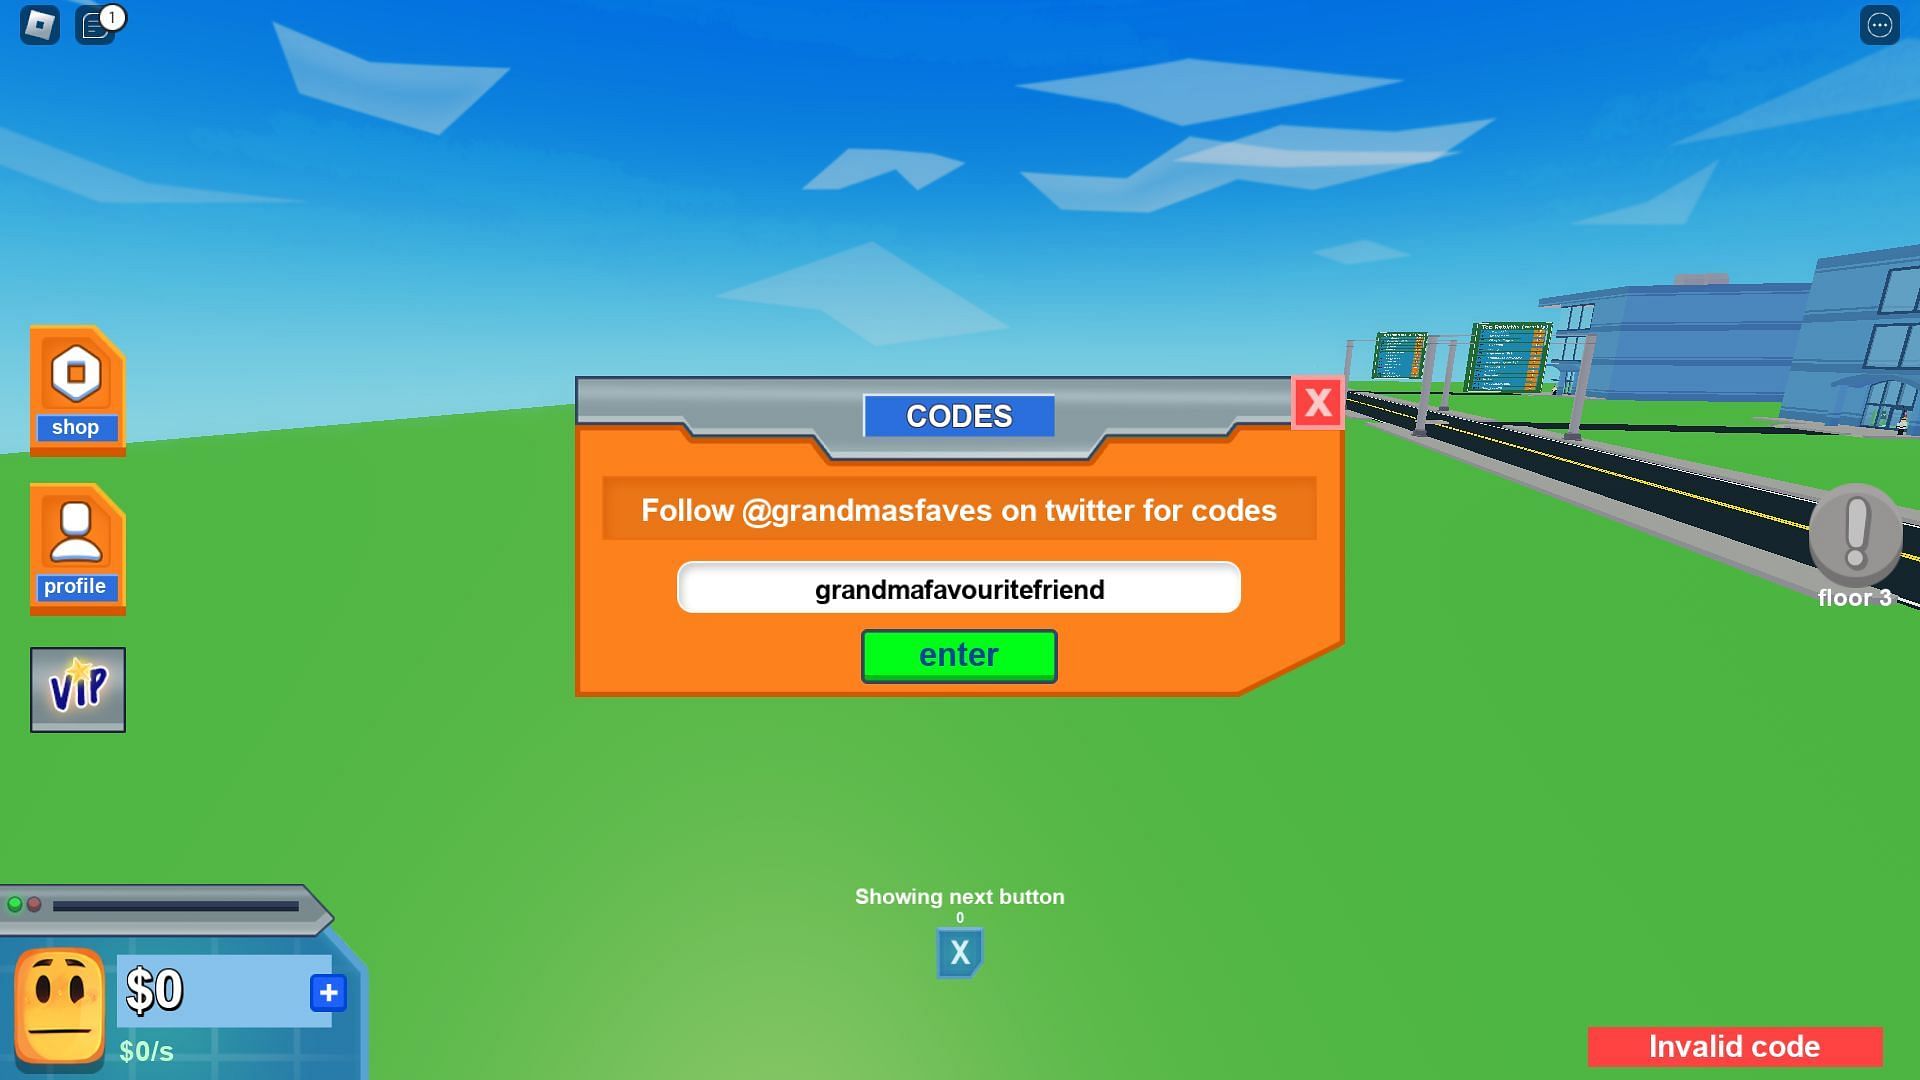 Troubleshooting codes for Mall Tycoon (Image via Roblox)